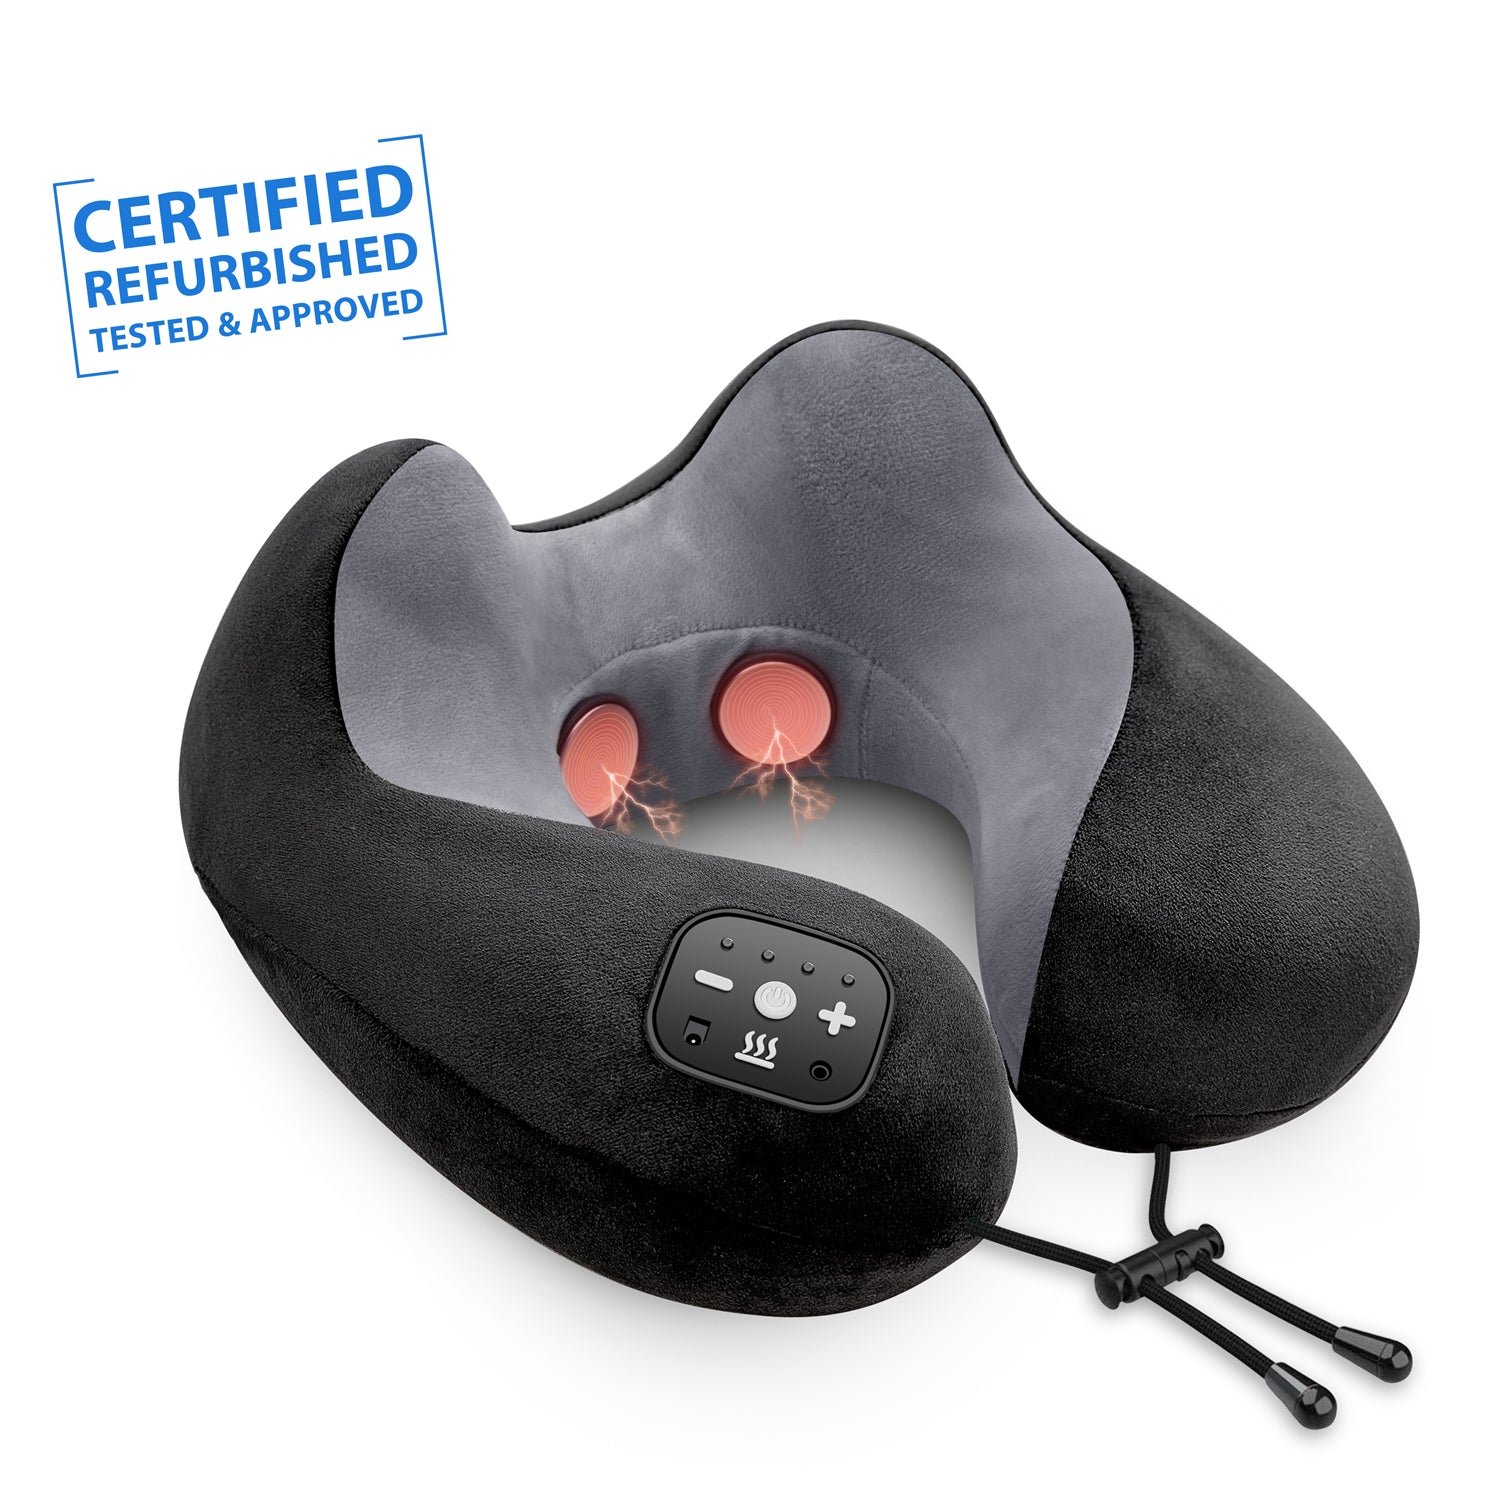 Certified Refurbished - Comfier Travel Pillow & Neck Massager with Heat, Memory Foam Neck Pillow - 6902U-USED